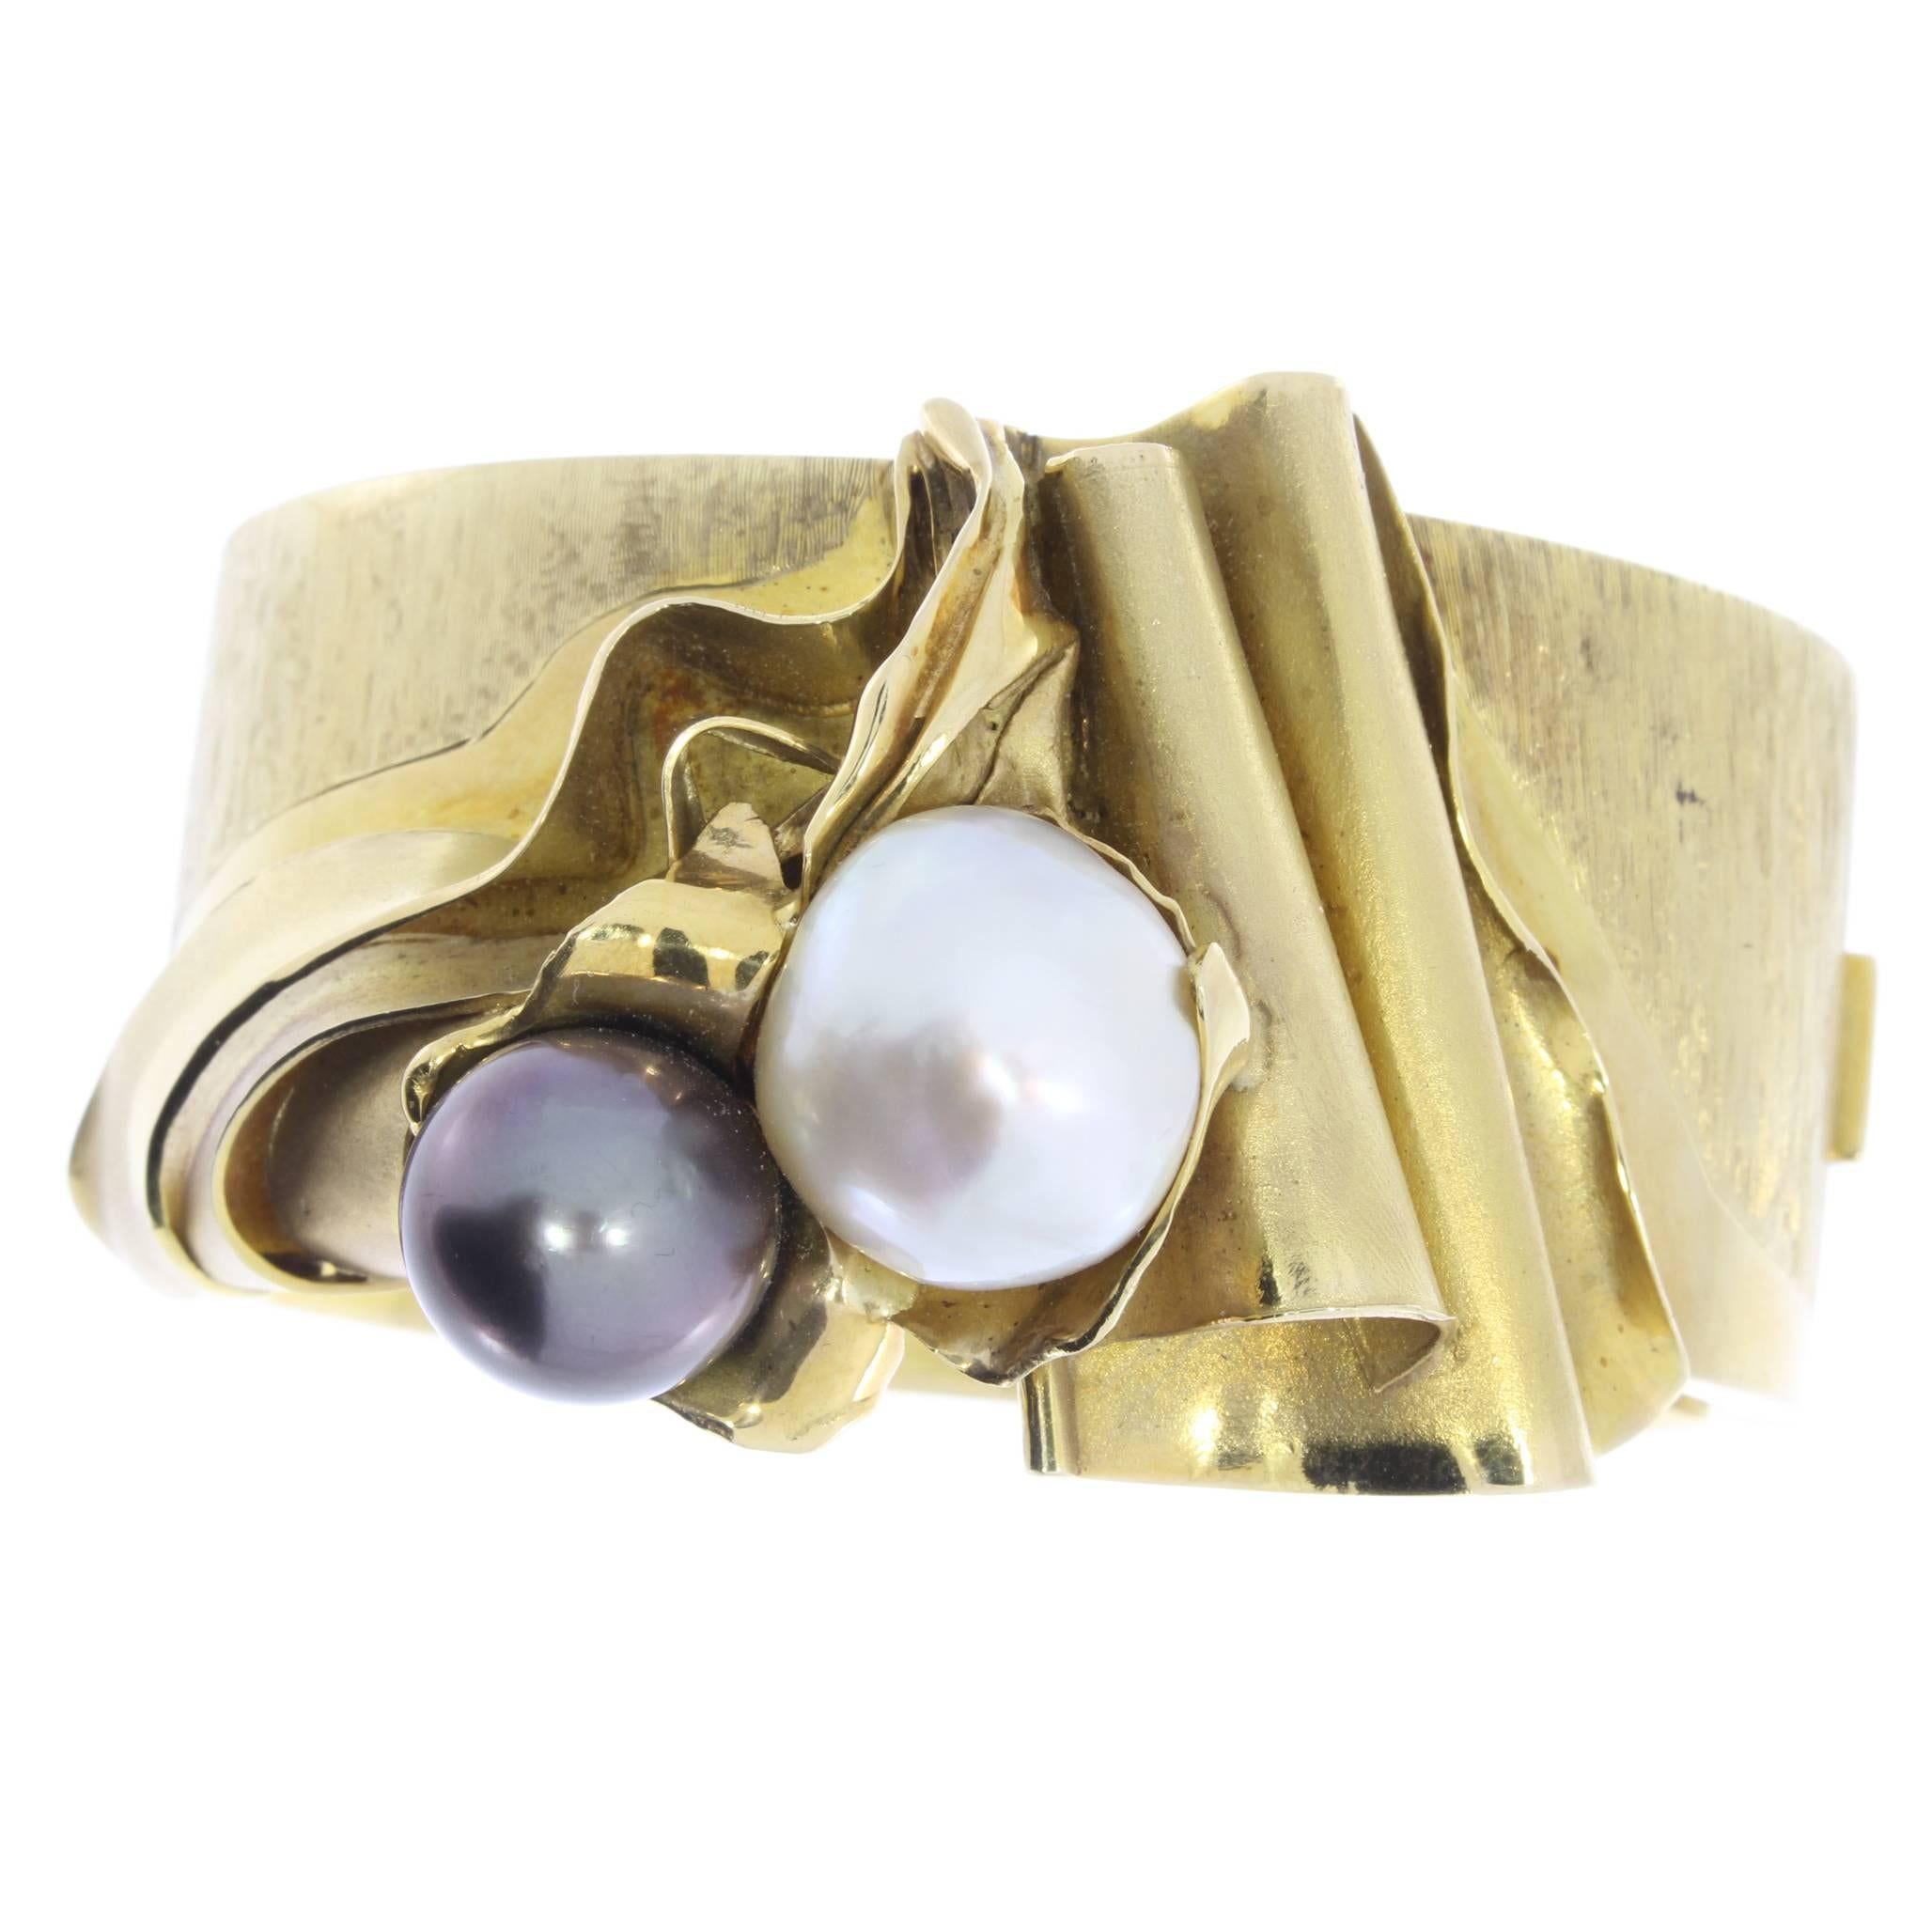 One of a Kind Pearl Gold Bangle Bracelet by Zerrener